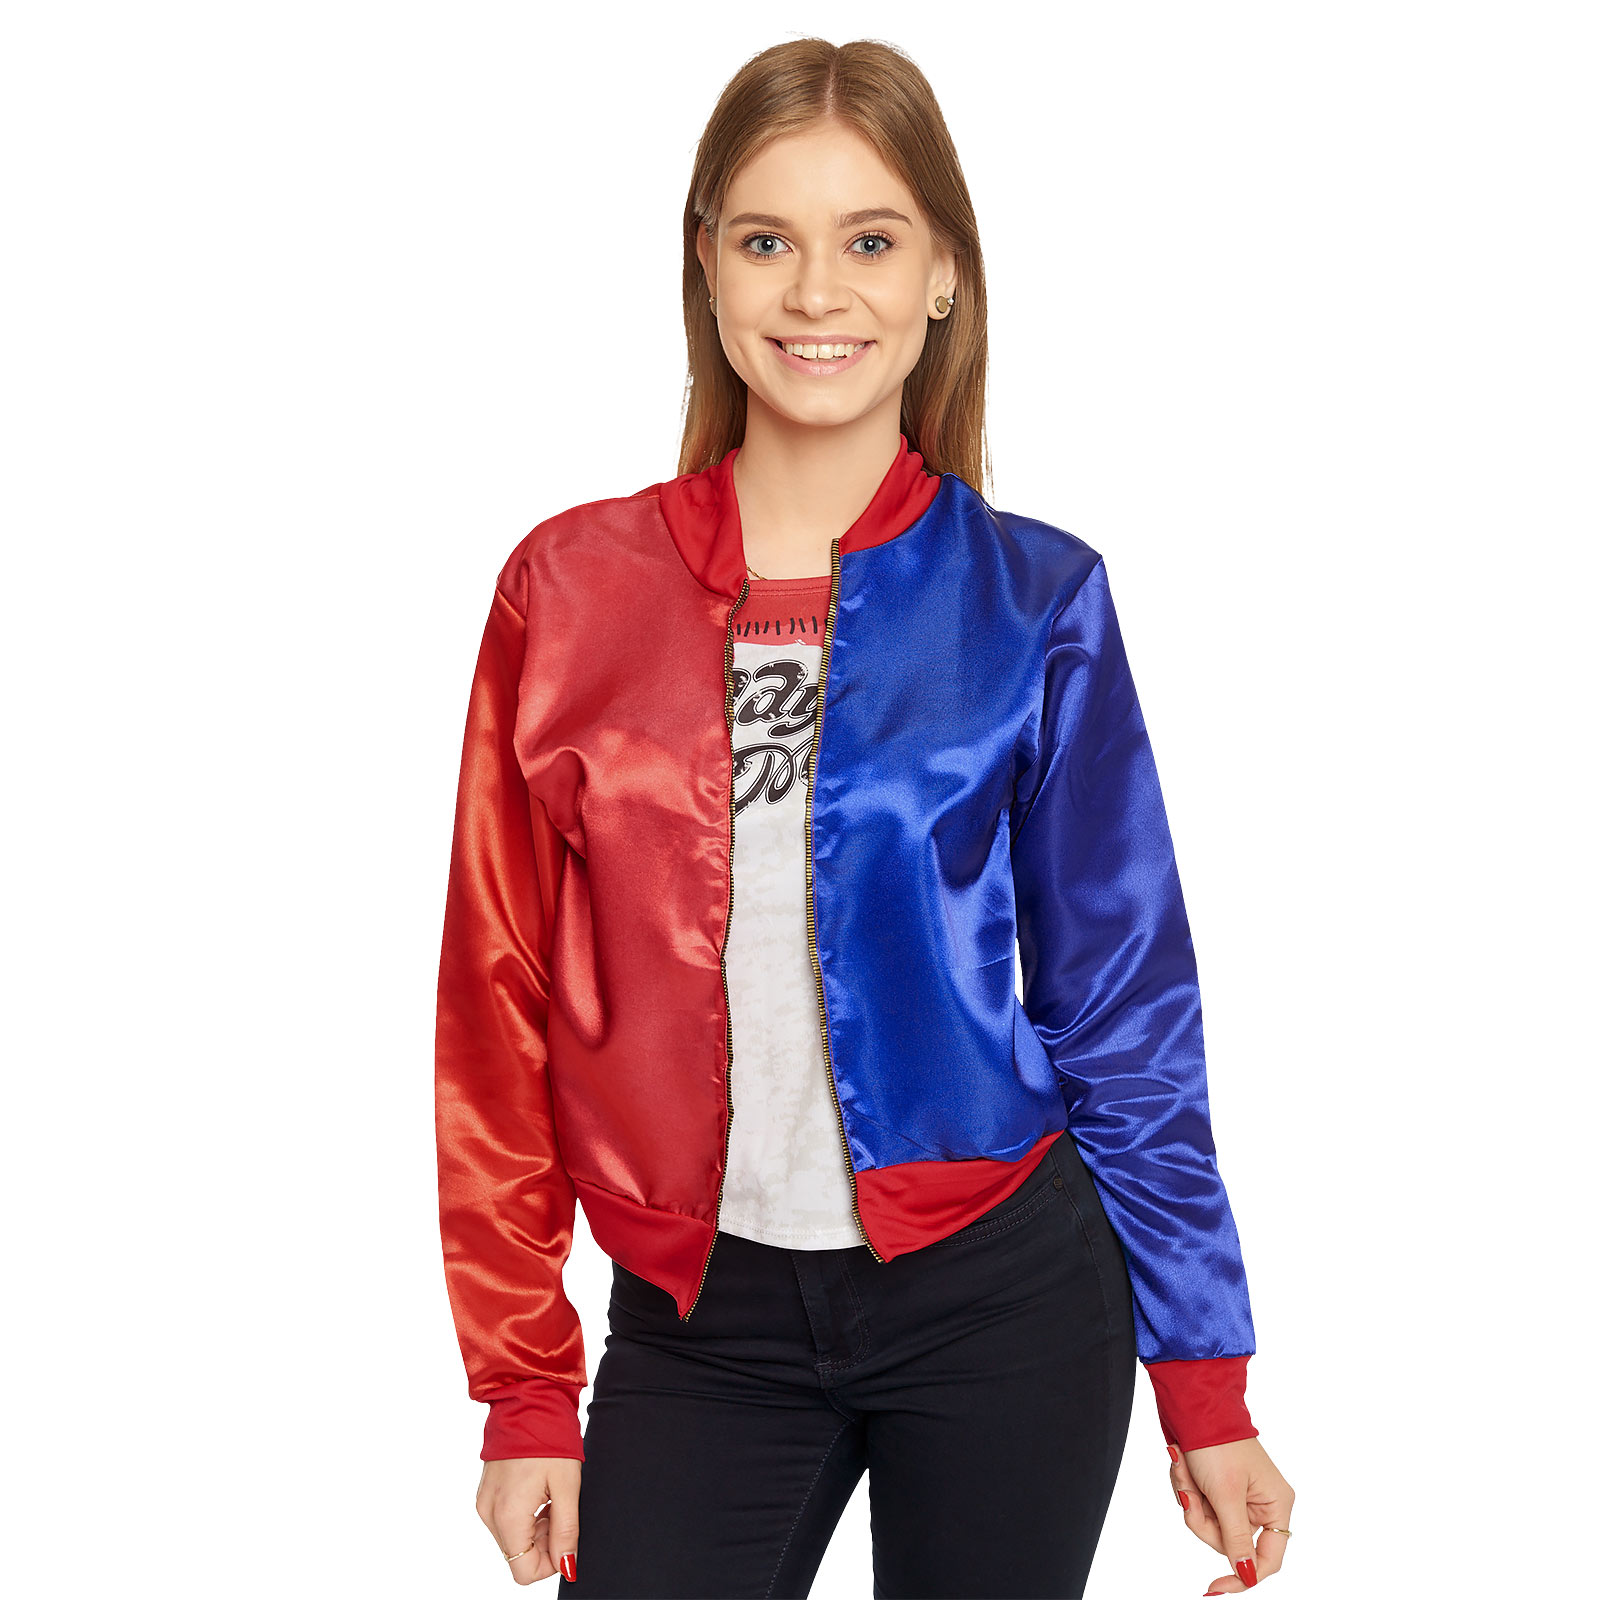 Suicide Squad - Harley Quinn Costume Jacket Women